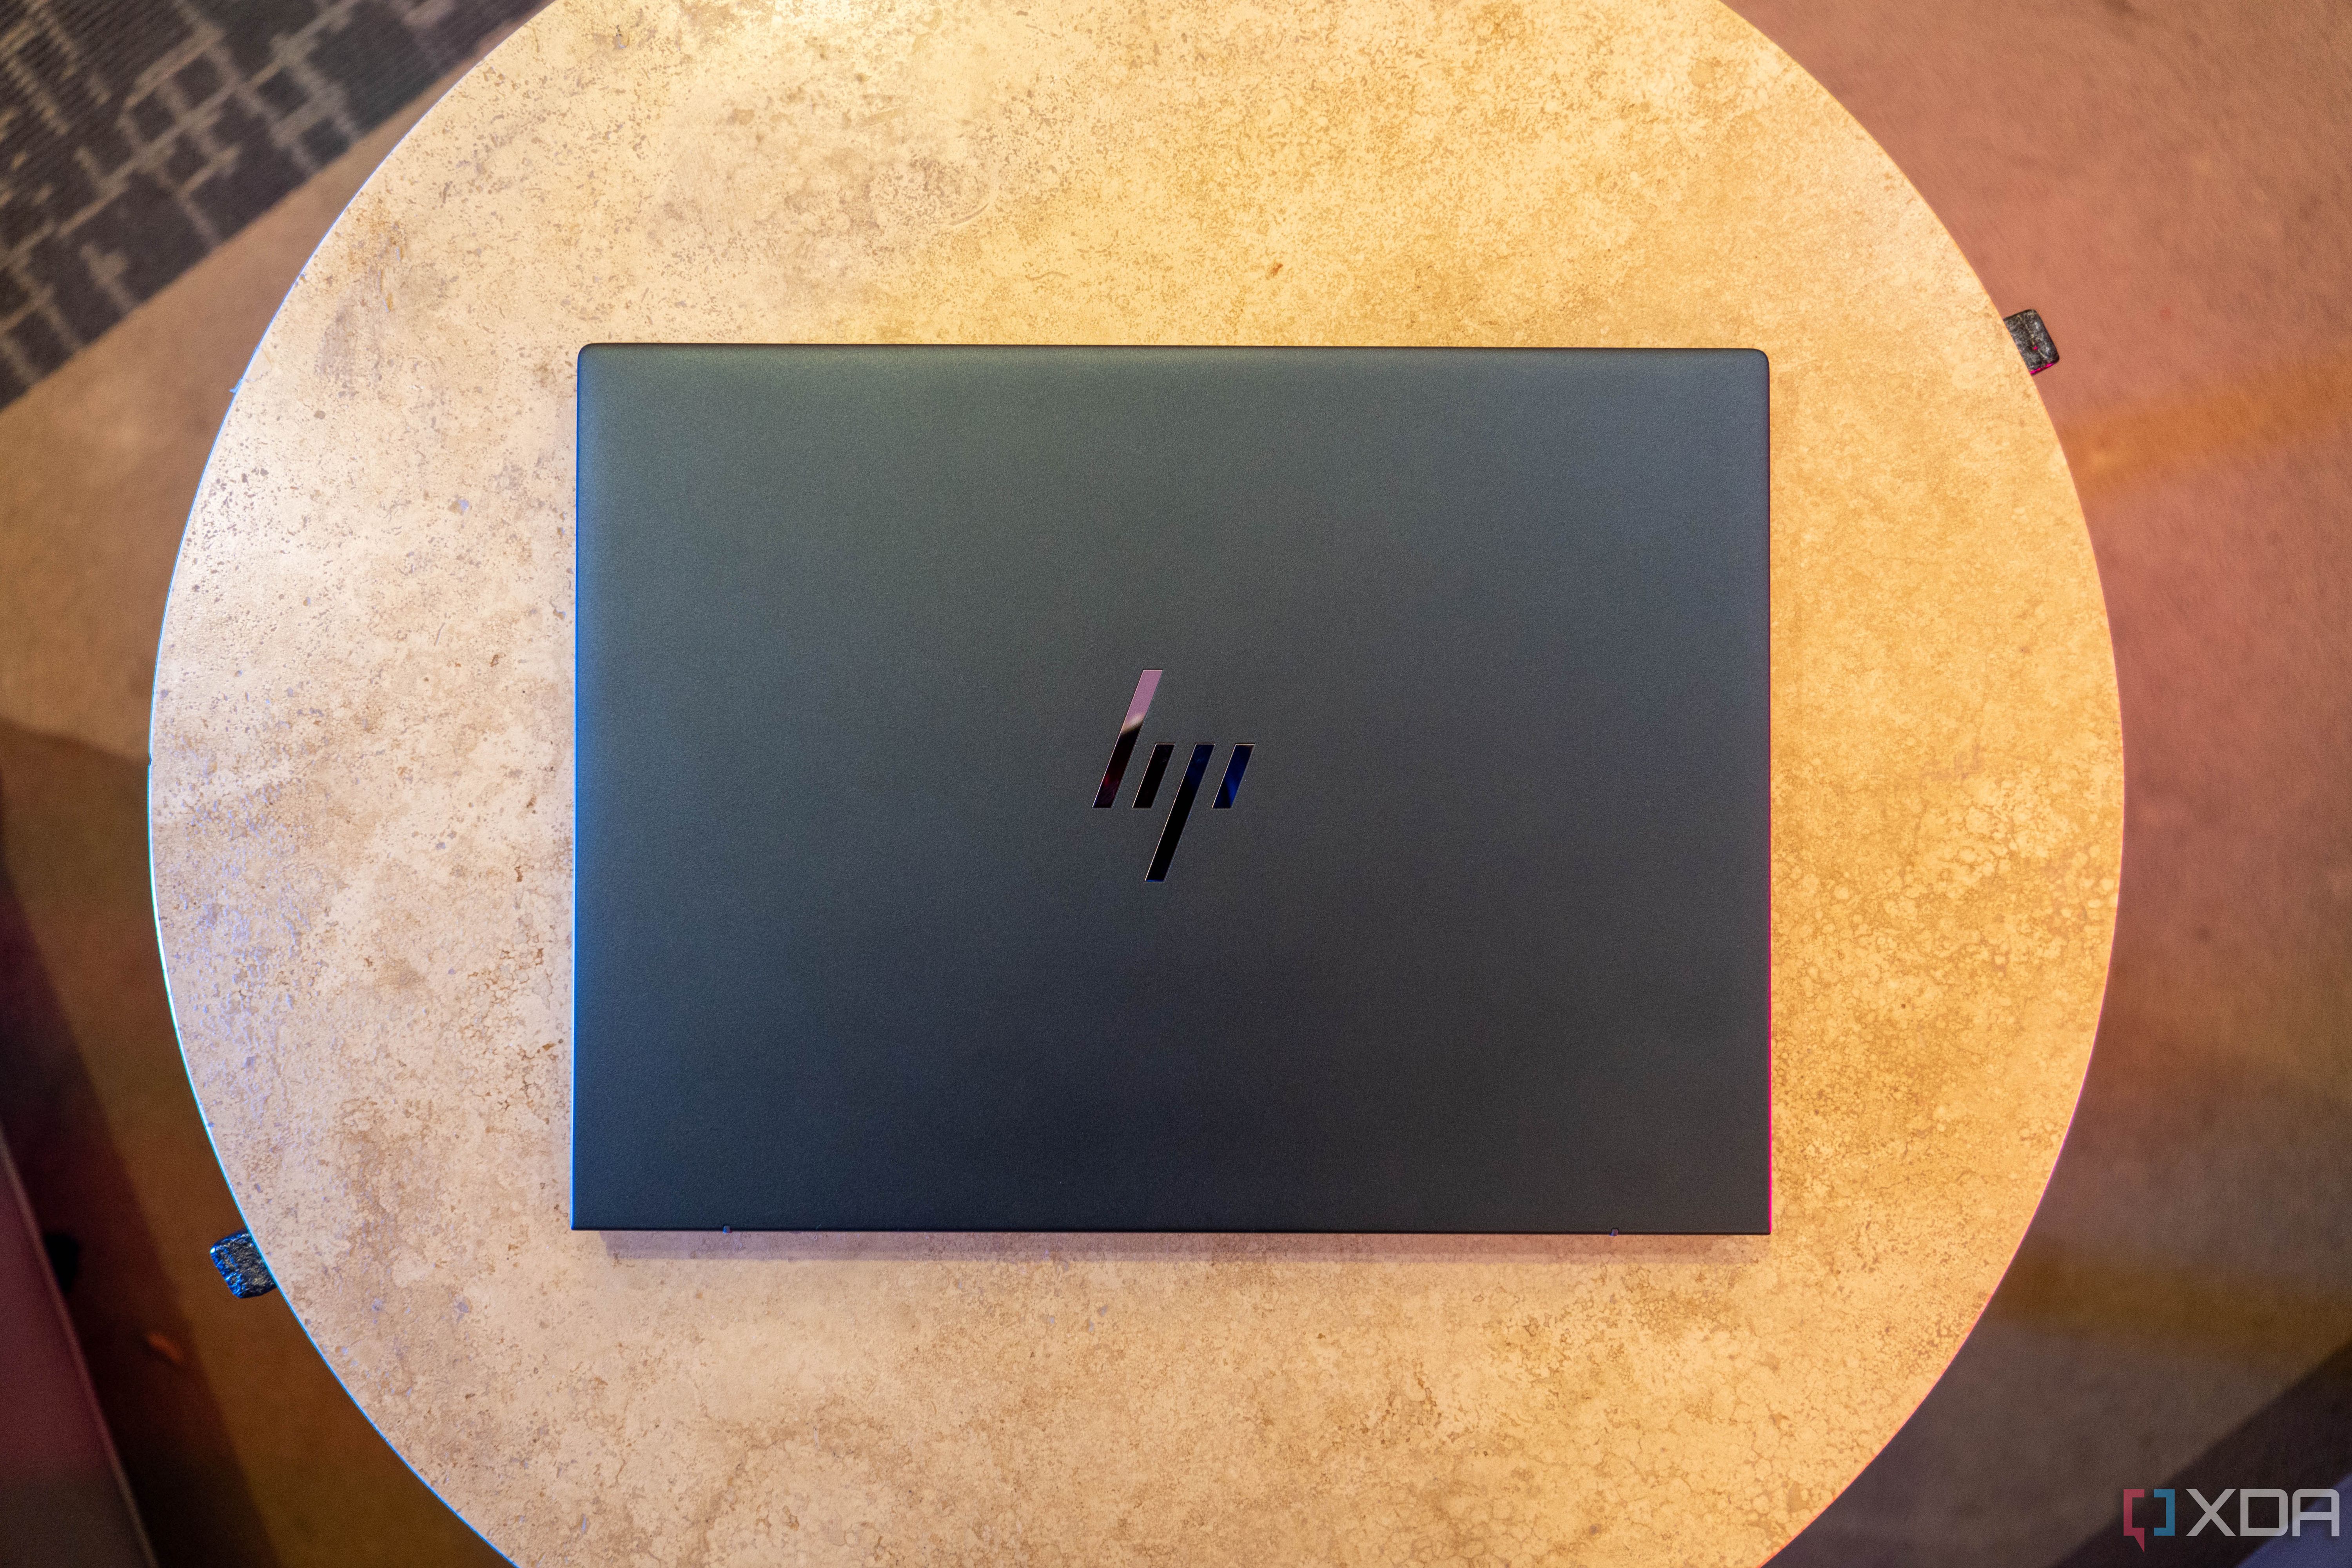 Top down view of HP laptop